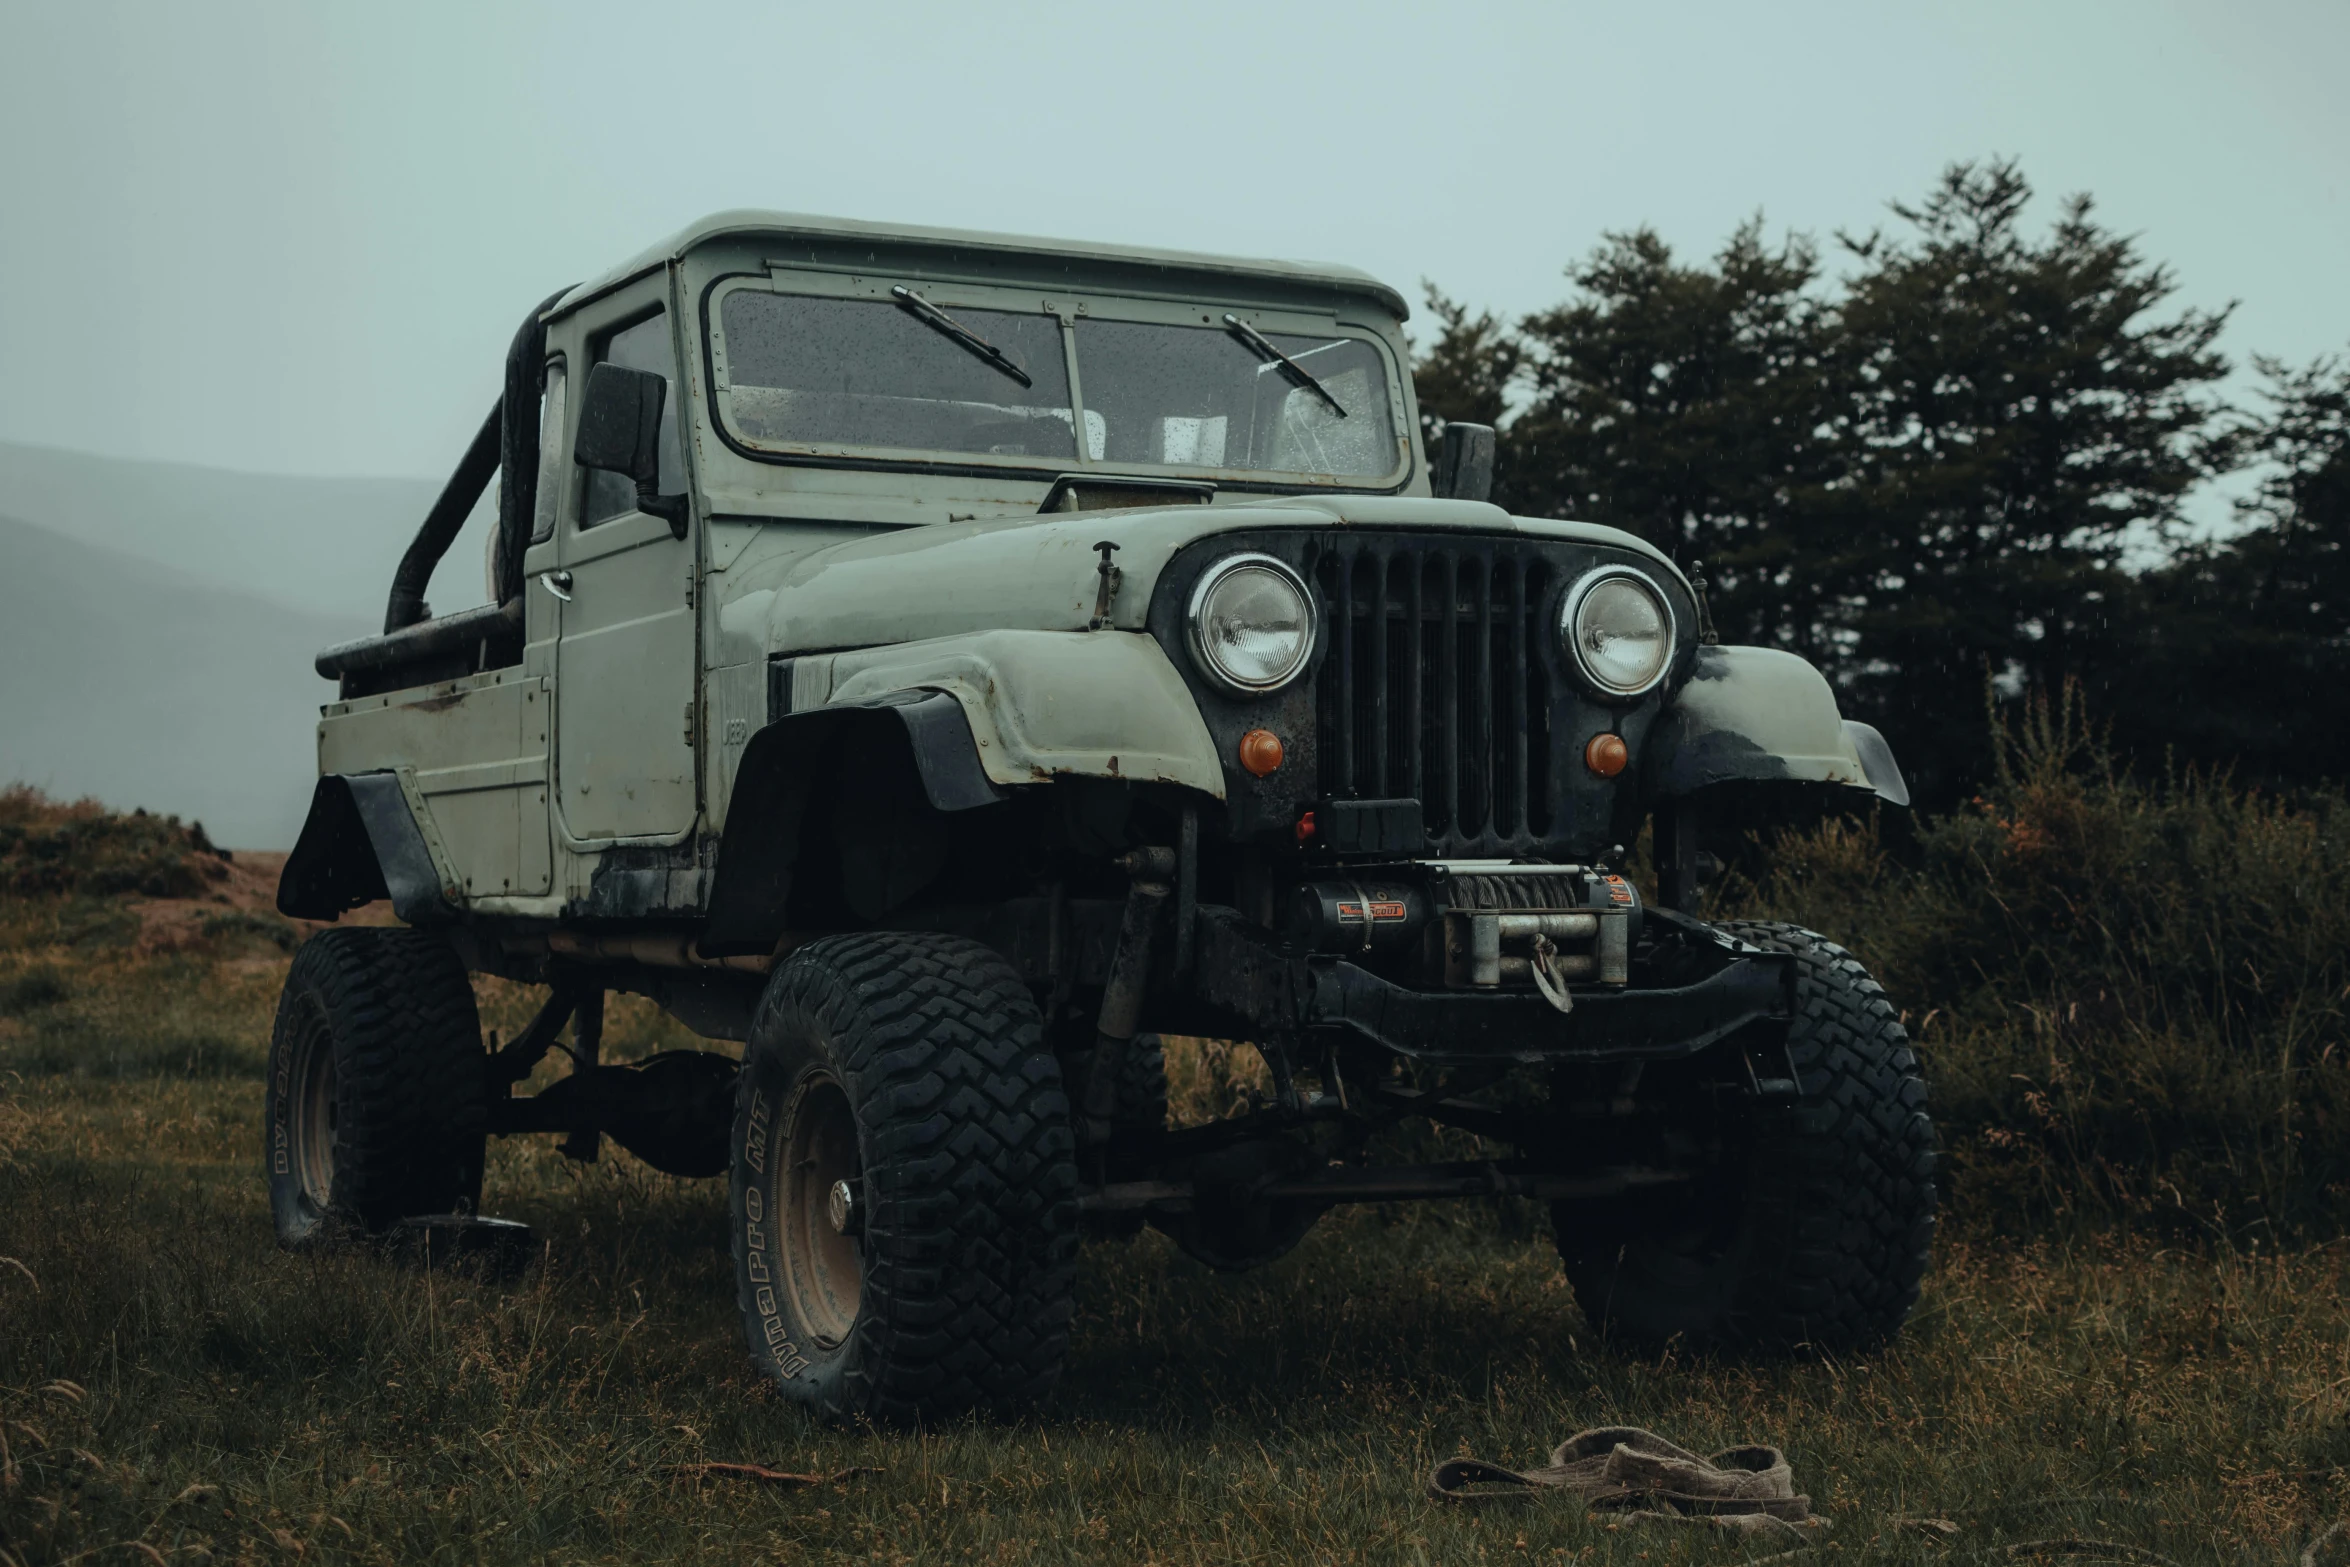 old jeep in grassy field on cloudy day